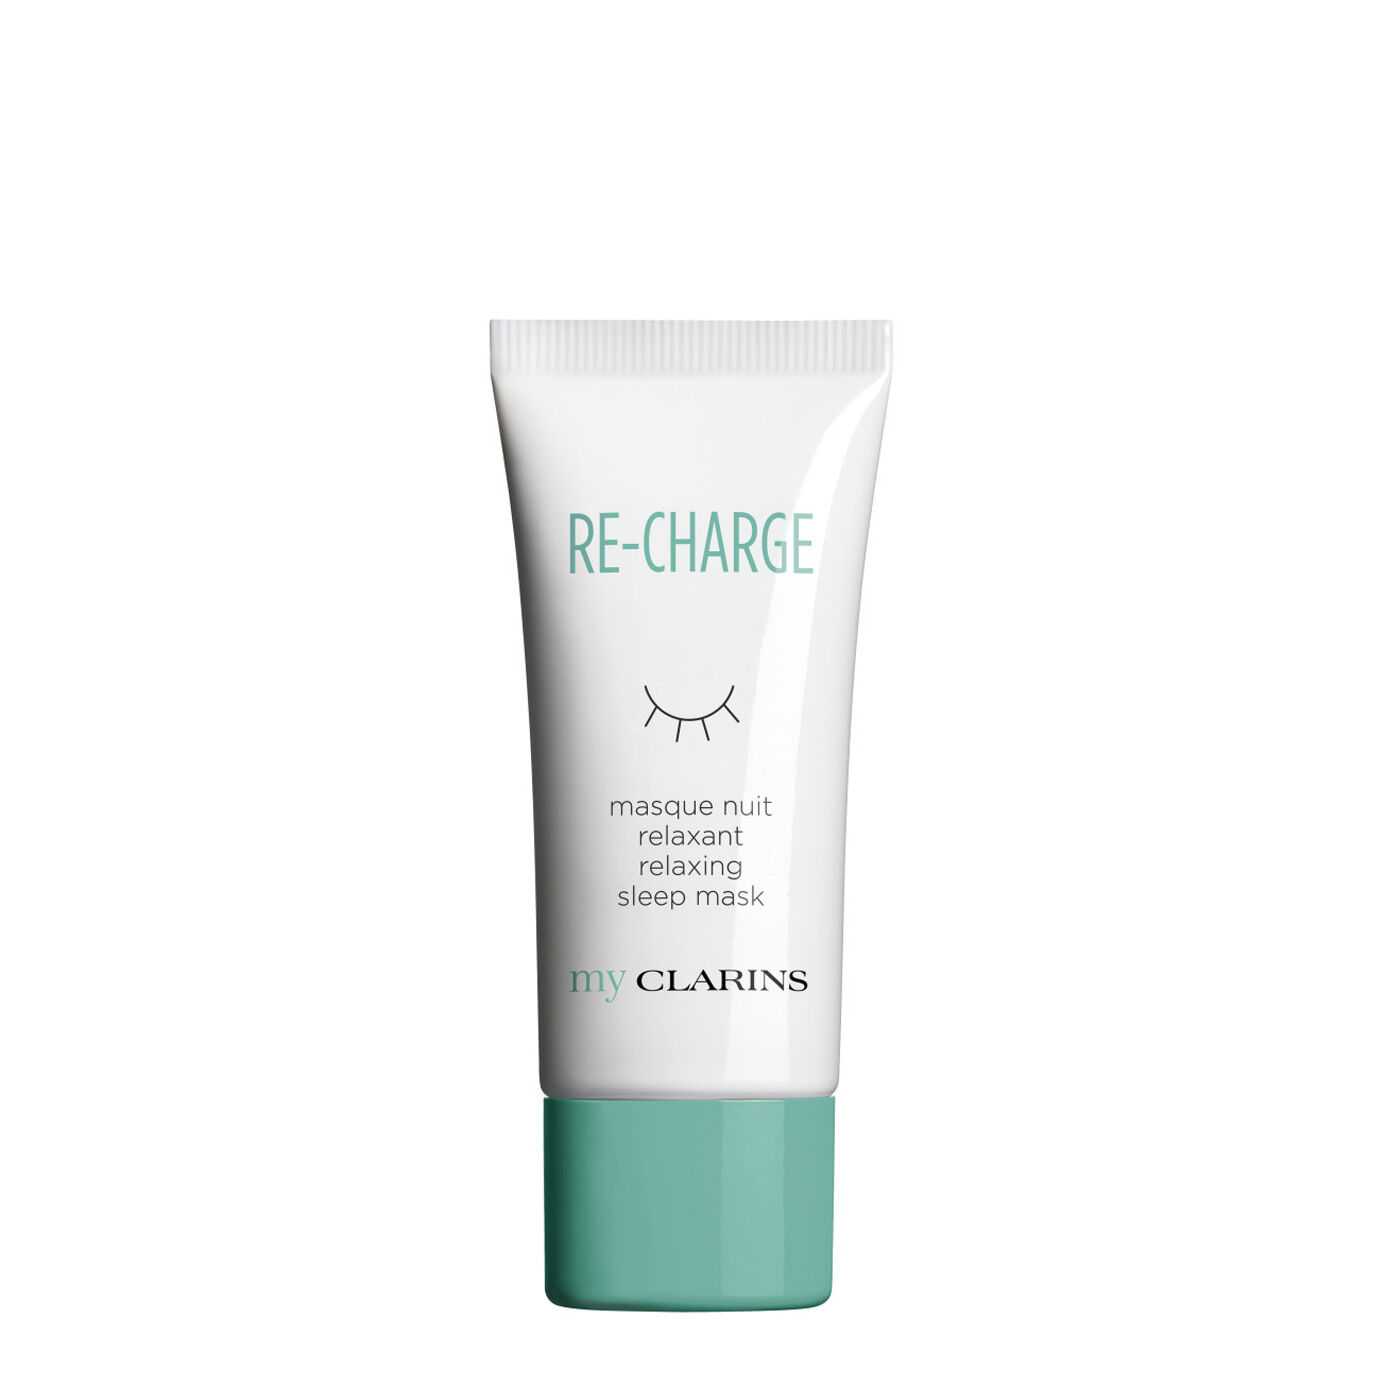 My Clarins RE-CHARGE relaxing sleep mask